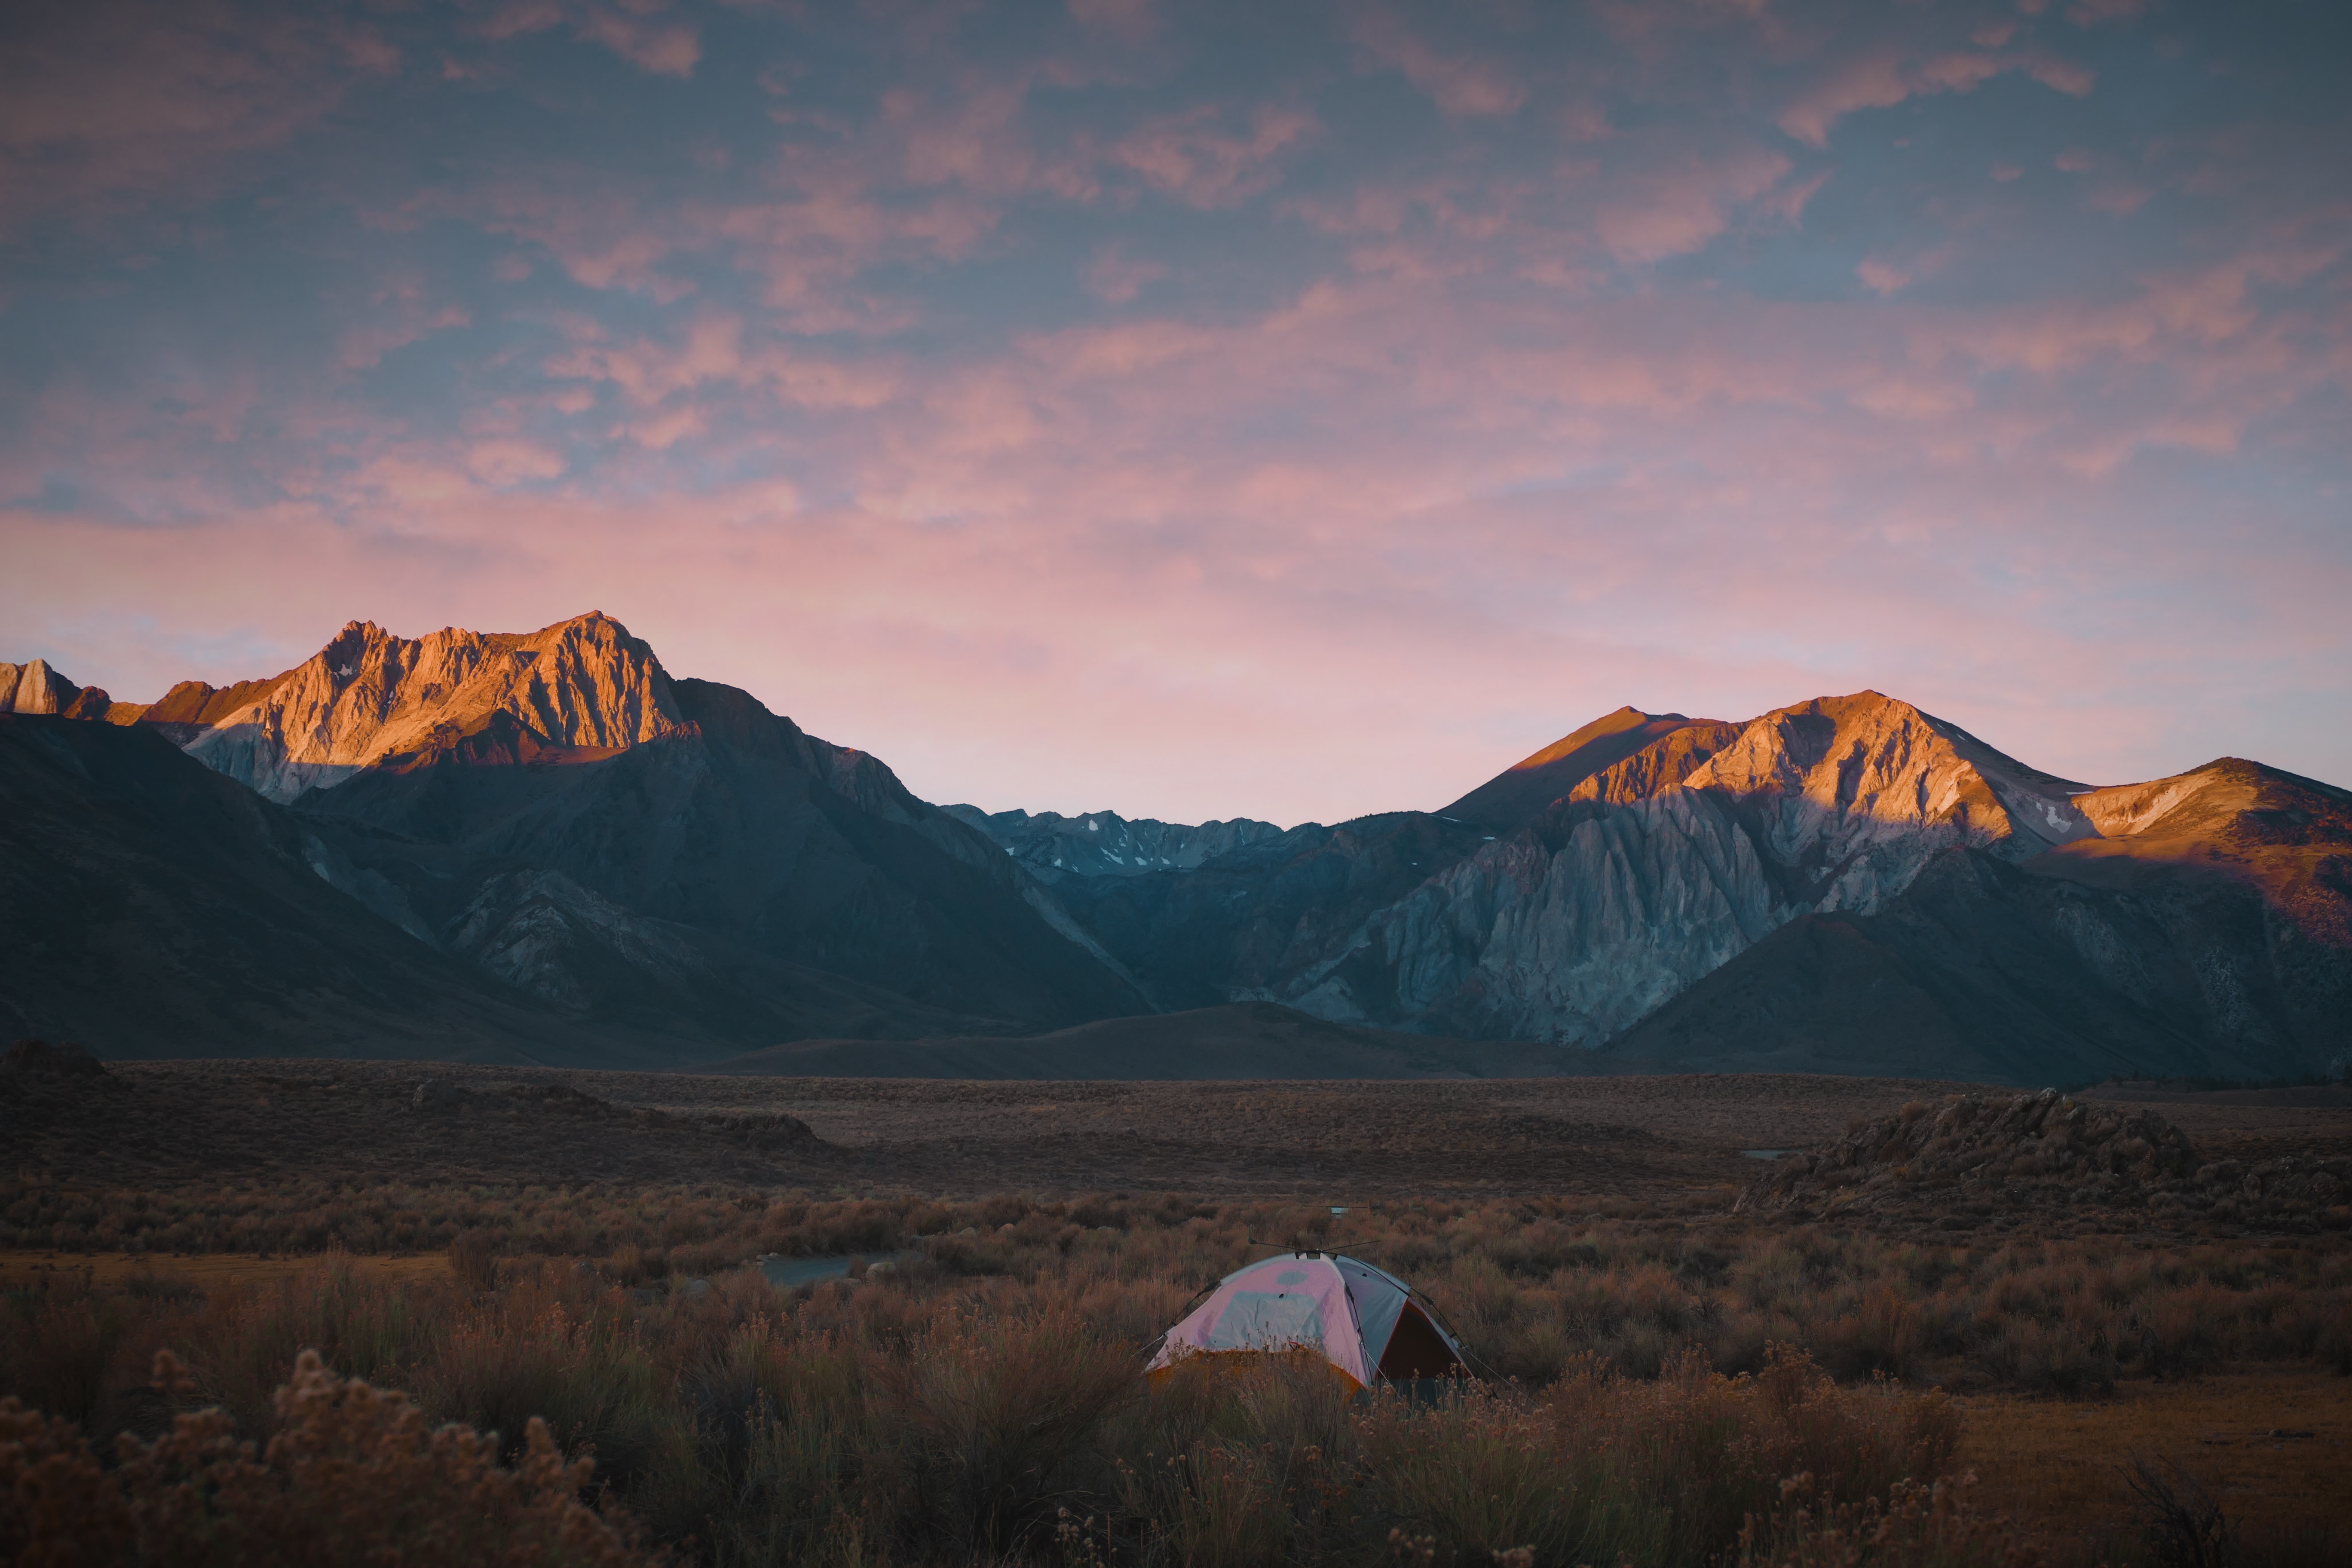 Camping mountains, landscape, campsite, tent Free Stock Photos